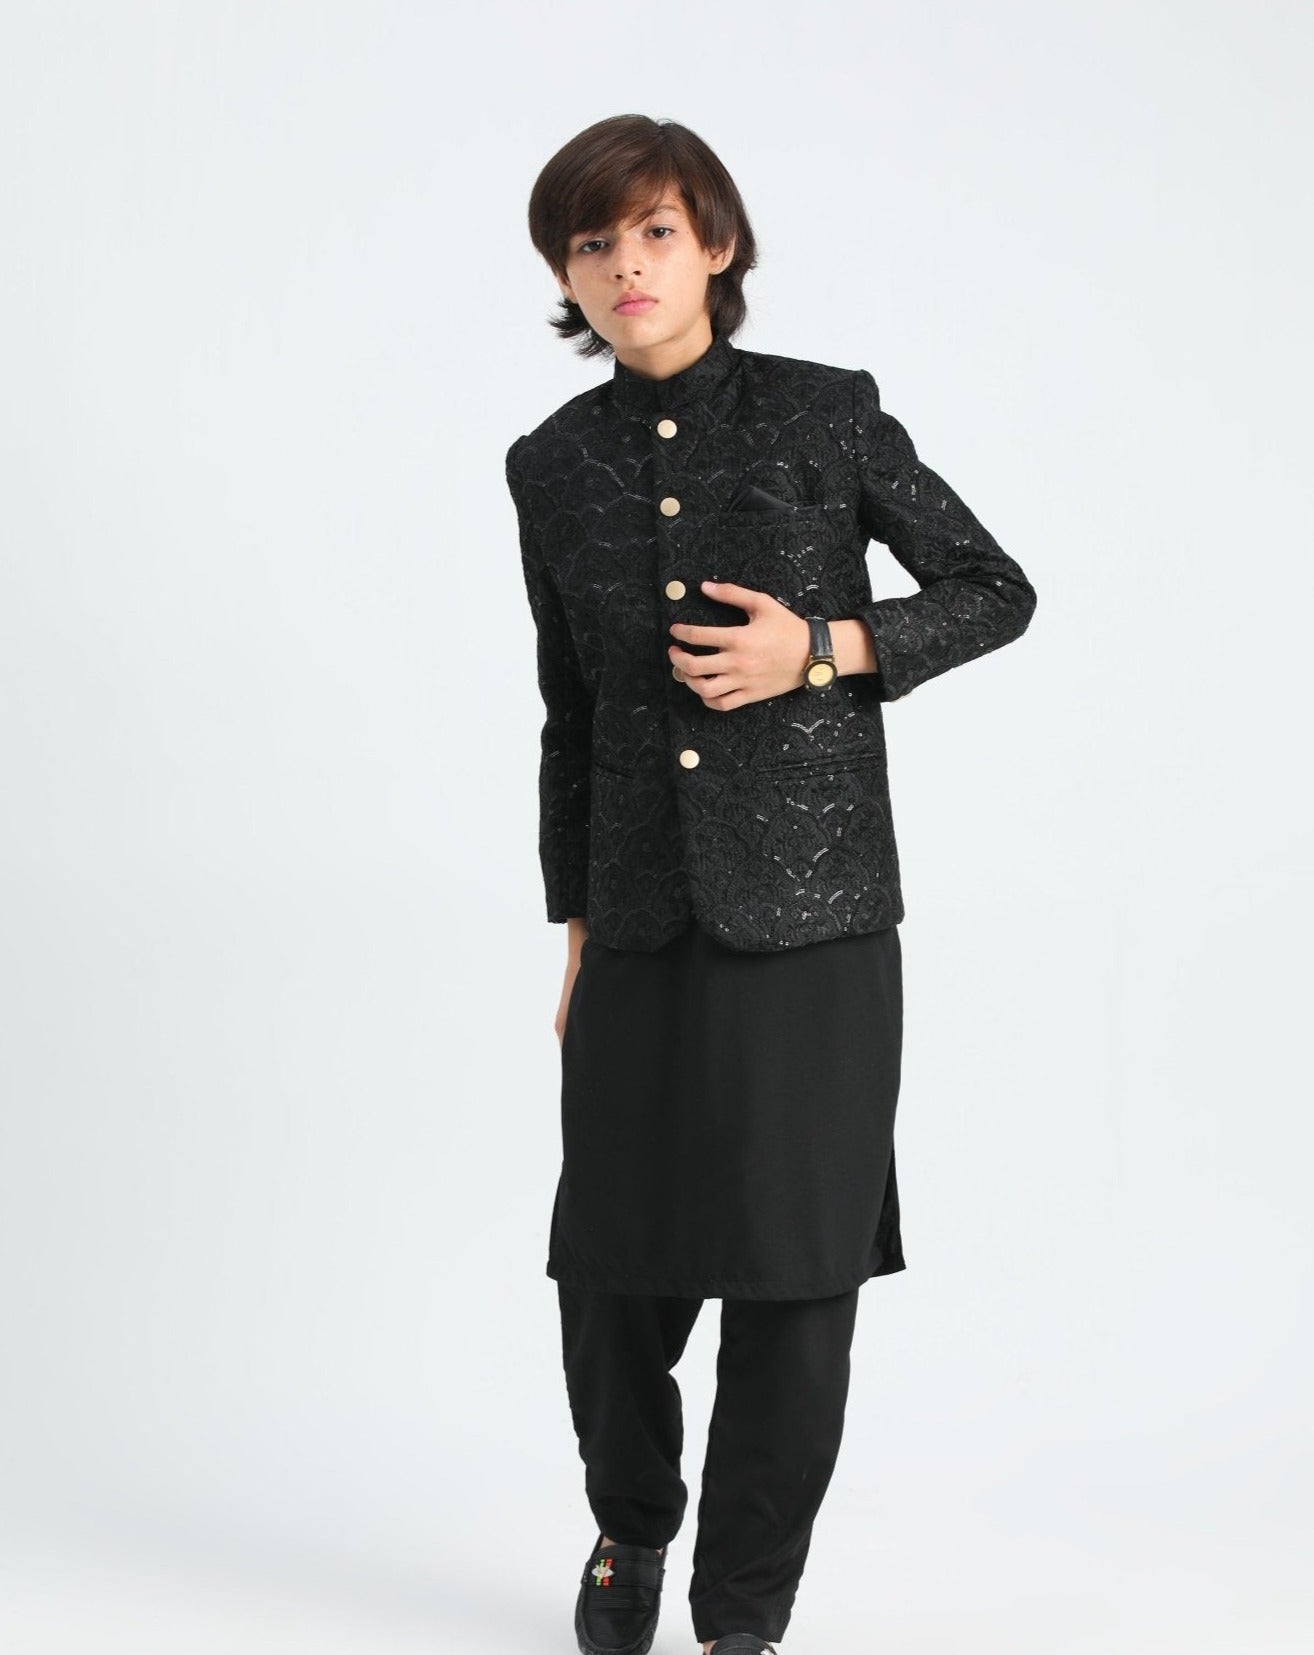 All Black Sequin Embroided - Festive 3PC Set - Kids